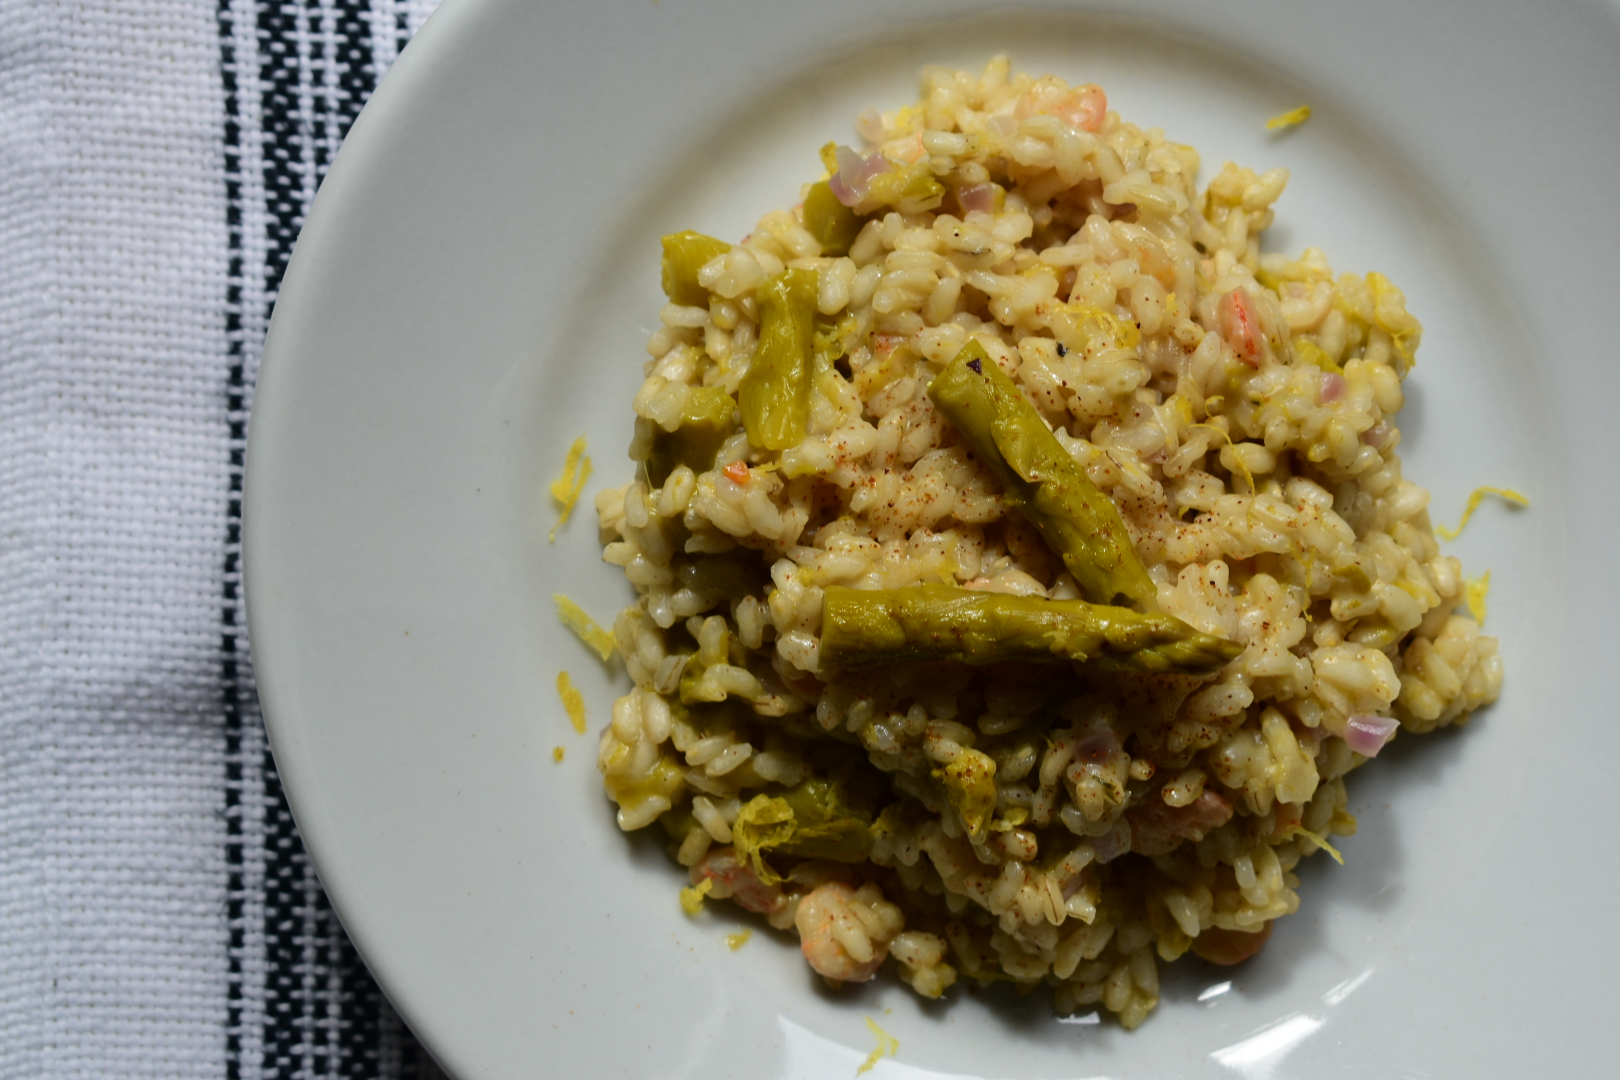 Shrimps and asparagus risotto